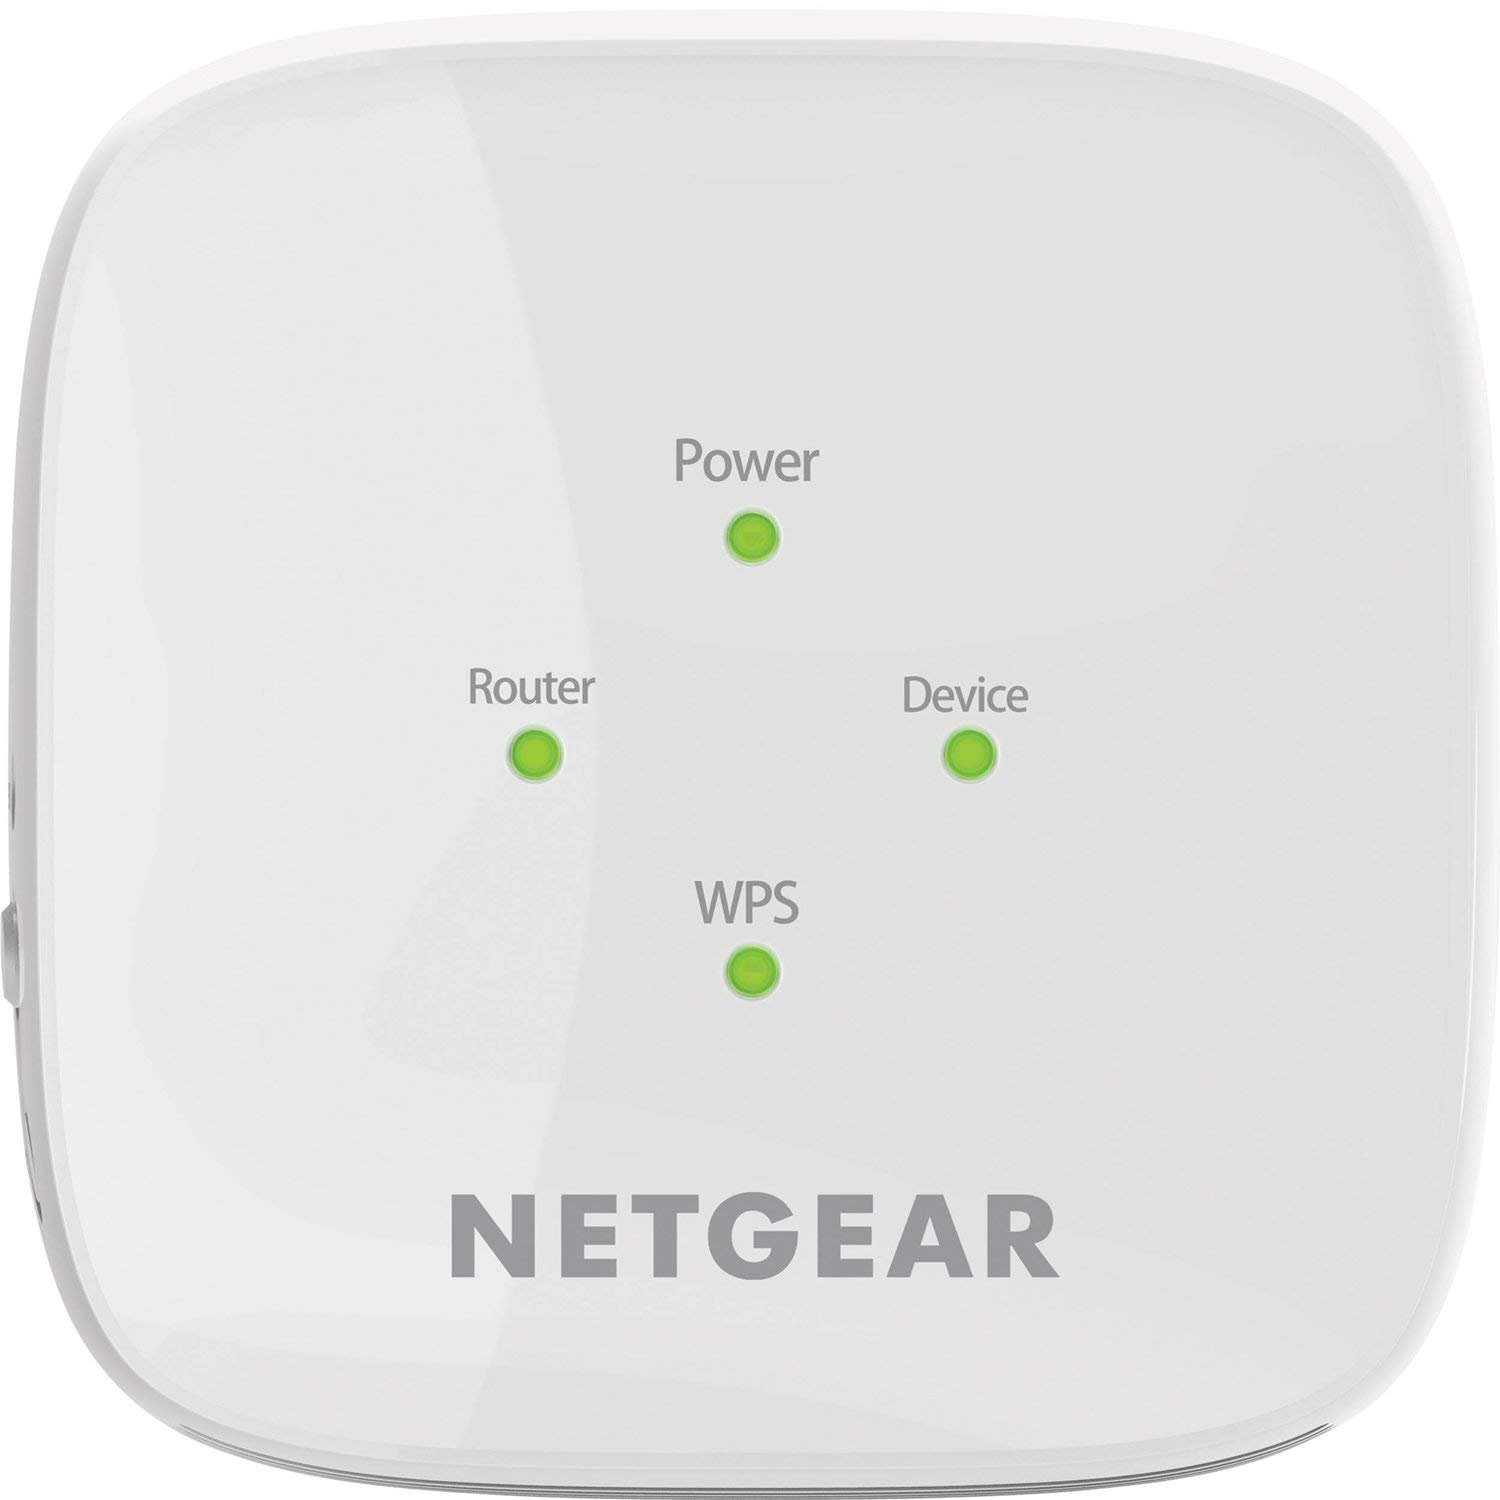 Netgear WiFi Range Extender EX6110 - Extend your Internet Wi-Fi up to 1200 sq ft & 20 Devices with AC1200 Dual Band Wireless Signal Repeater